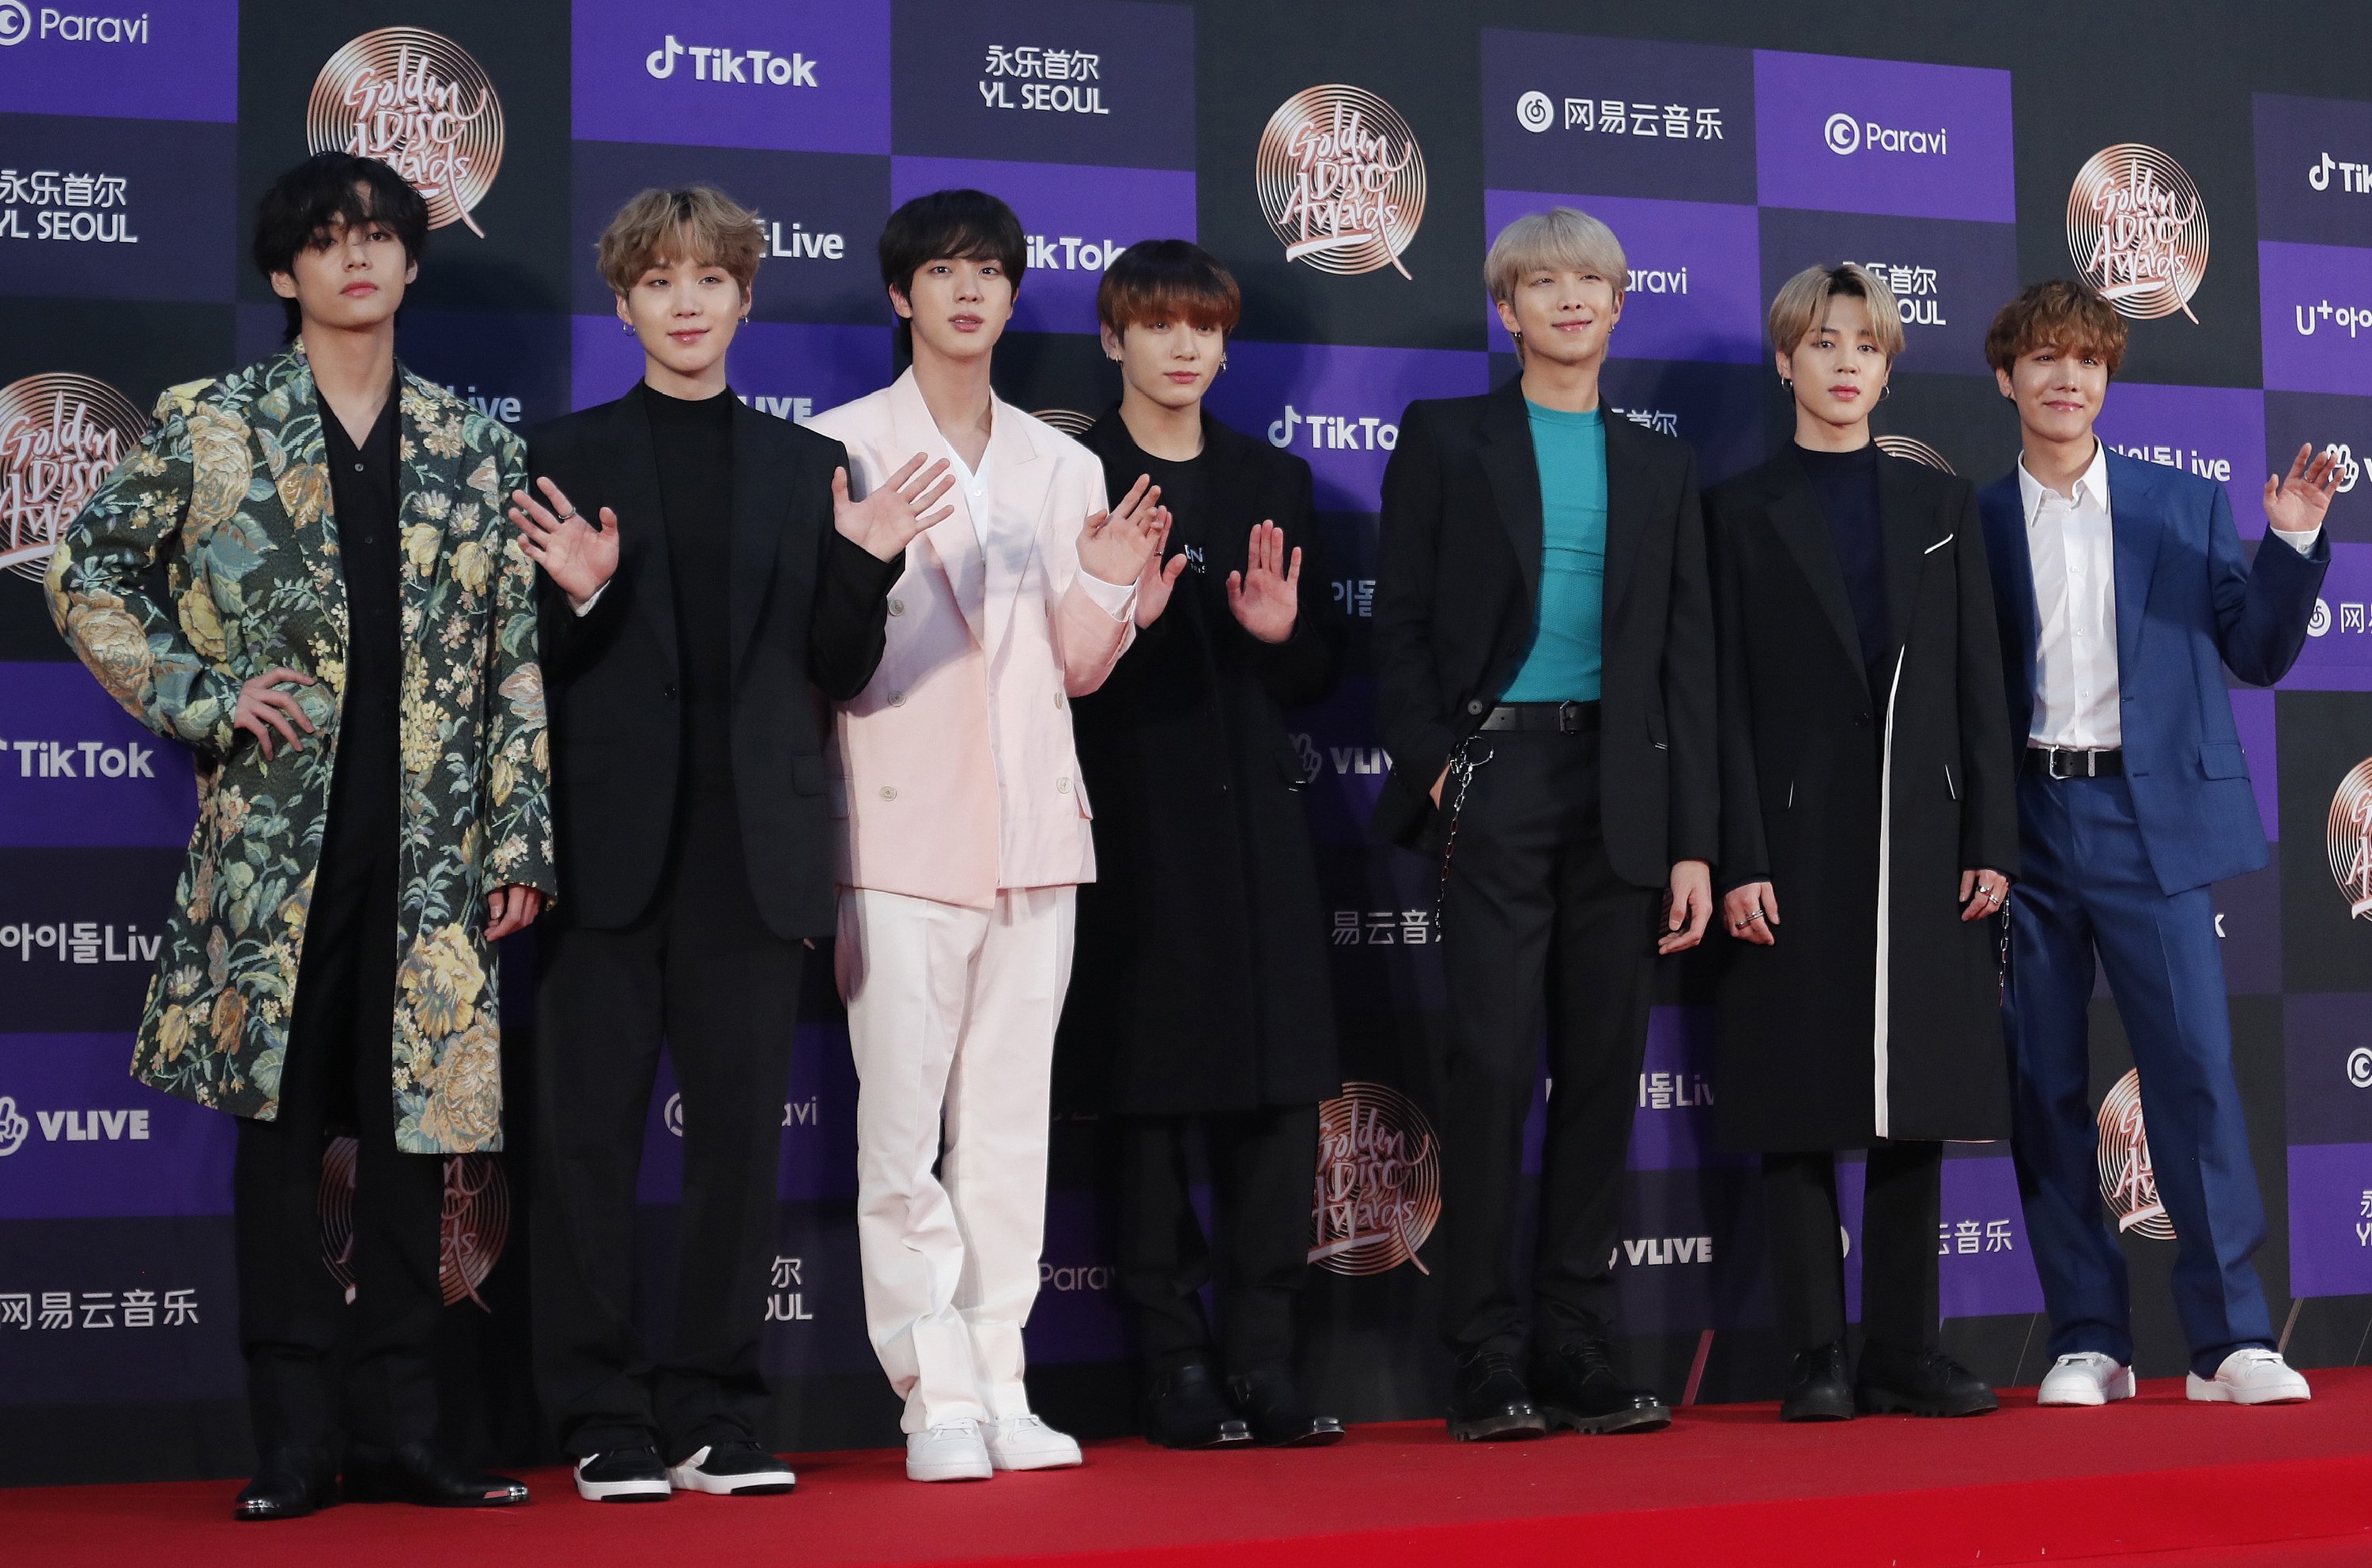 Members of BTS pose for photos during the Golden Disk Awards in Seoul, South Korea, on Jan. 5, 2020. (AP Photo)